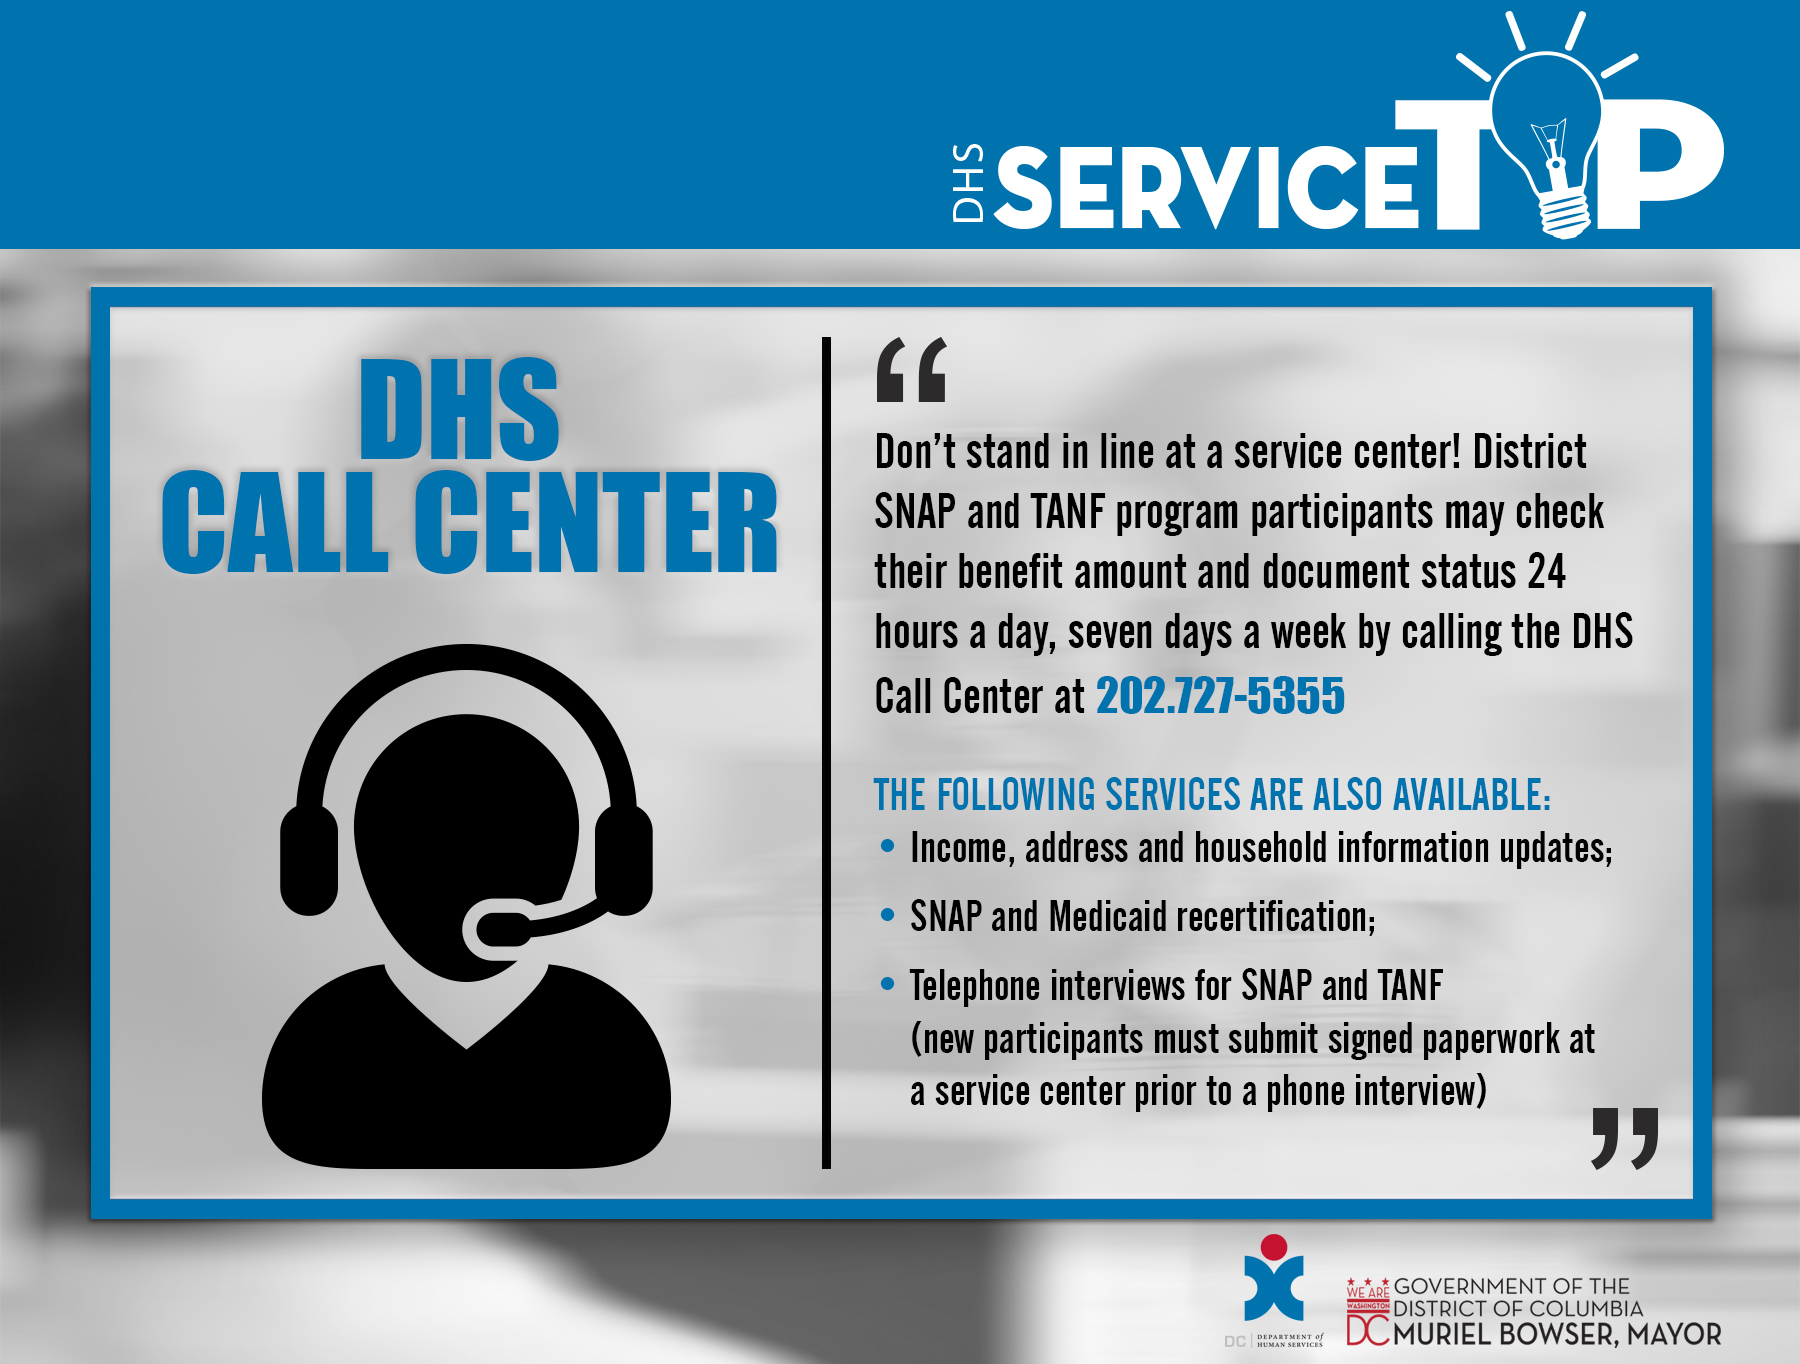 Service Tip Tuesday 5/22